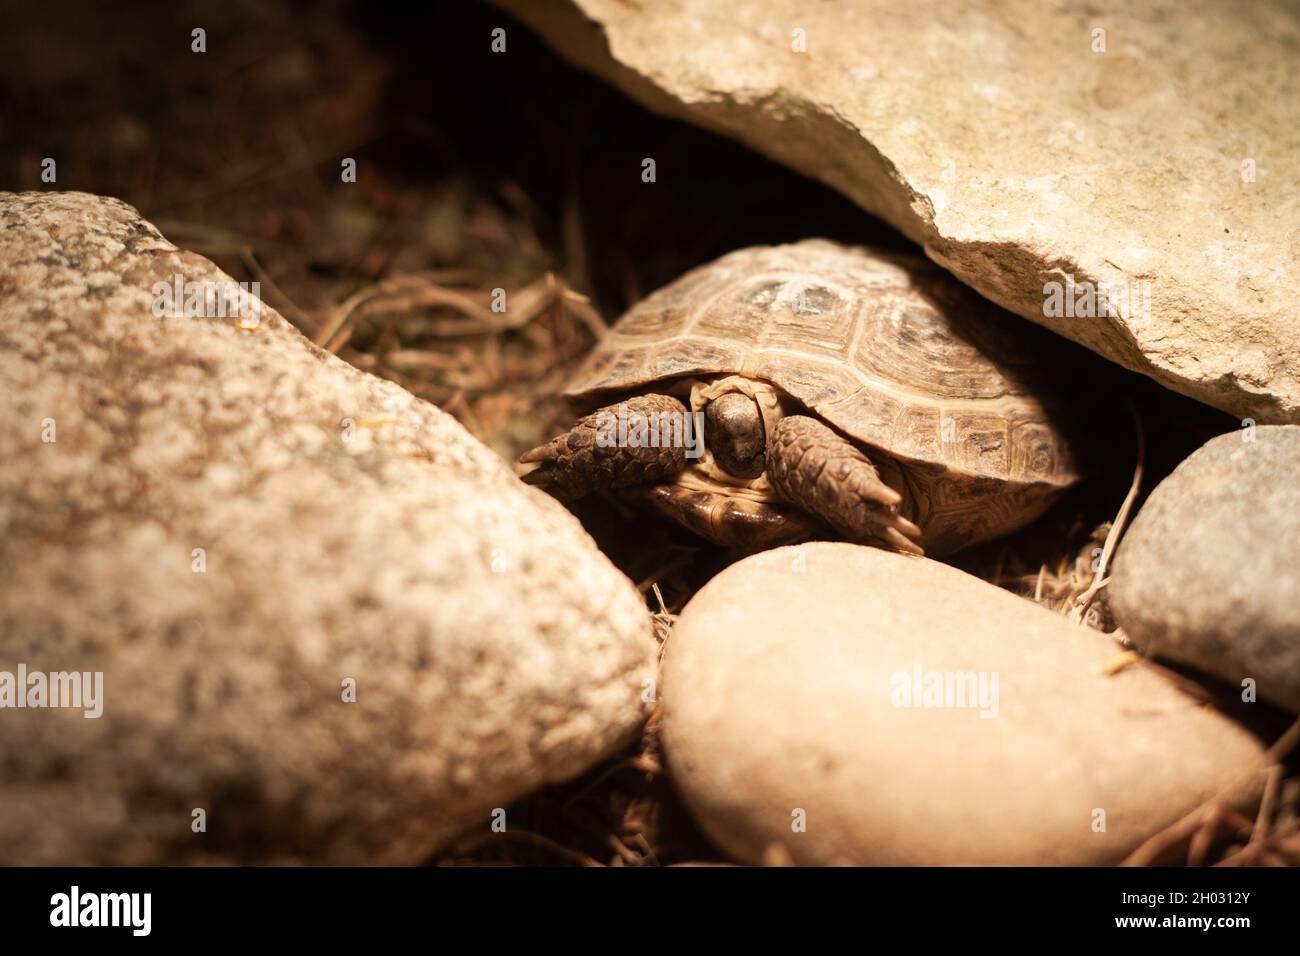 Baby Russian tortoise partially hiding its head and legs in shell | Baby steppe tortoise hiding in carapace, among rocks, Tortoise under light bulb Stock Photo